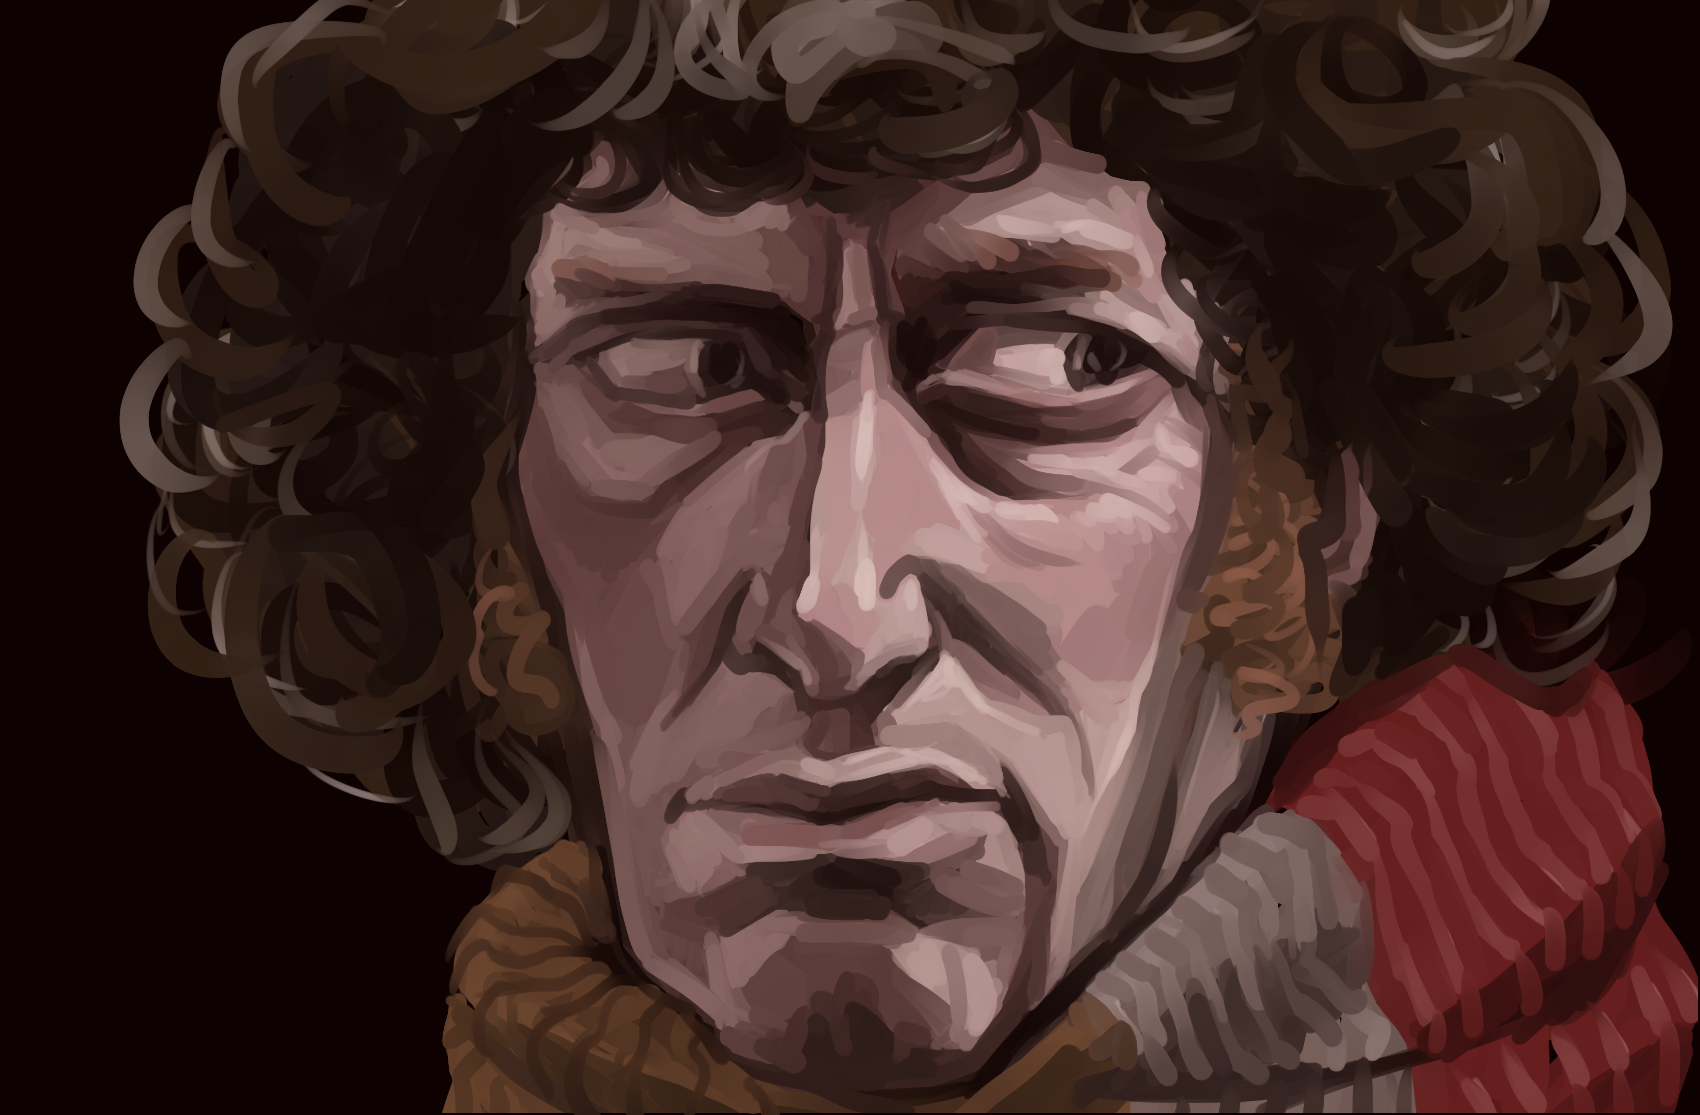 Digital painting of the fourth Doctor from Doctor Who up close. He has shaggy, curly brown hair, big 70s sideburns, pale skin, and large eyes. He is wearing a scarf and looking to his left suspiciously.